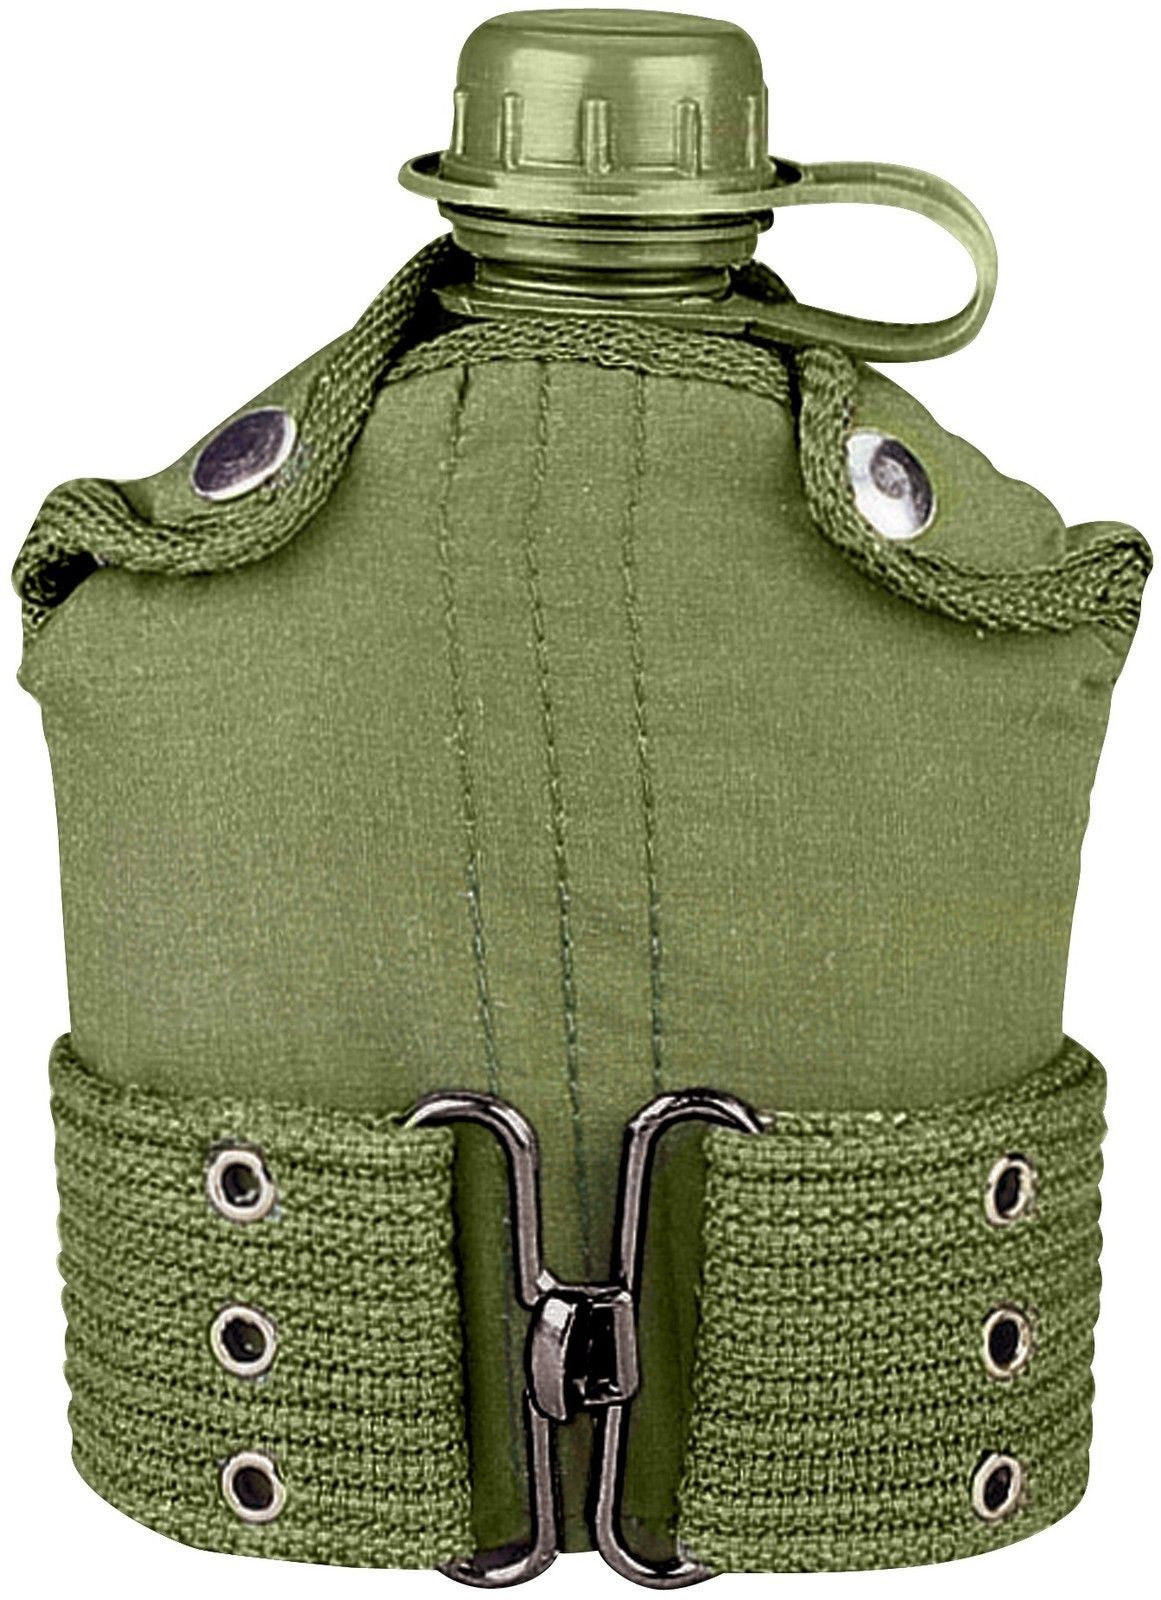 Olive Drab Plastic Canteen With Cover & Canvas Belt - GI Type Canteen Kit